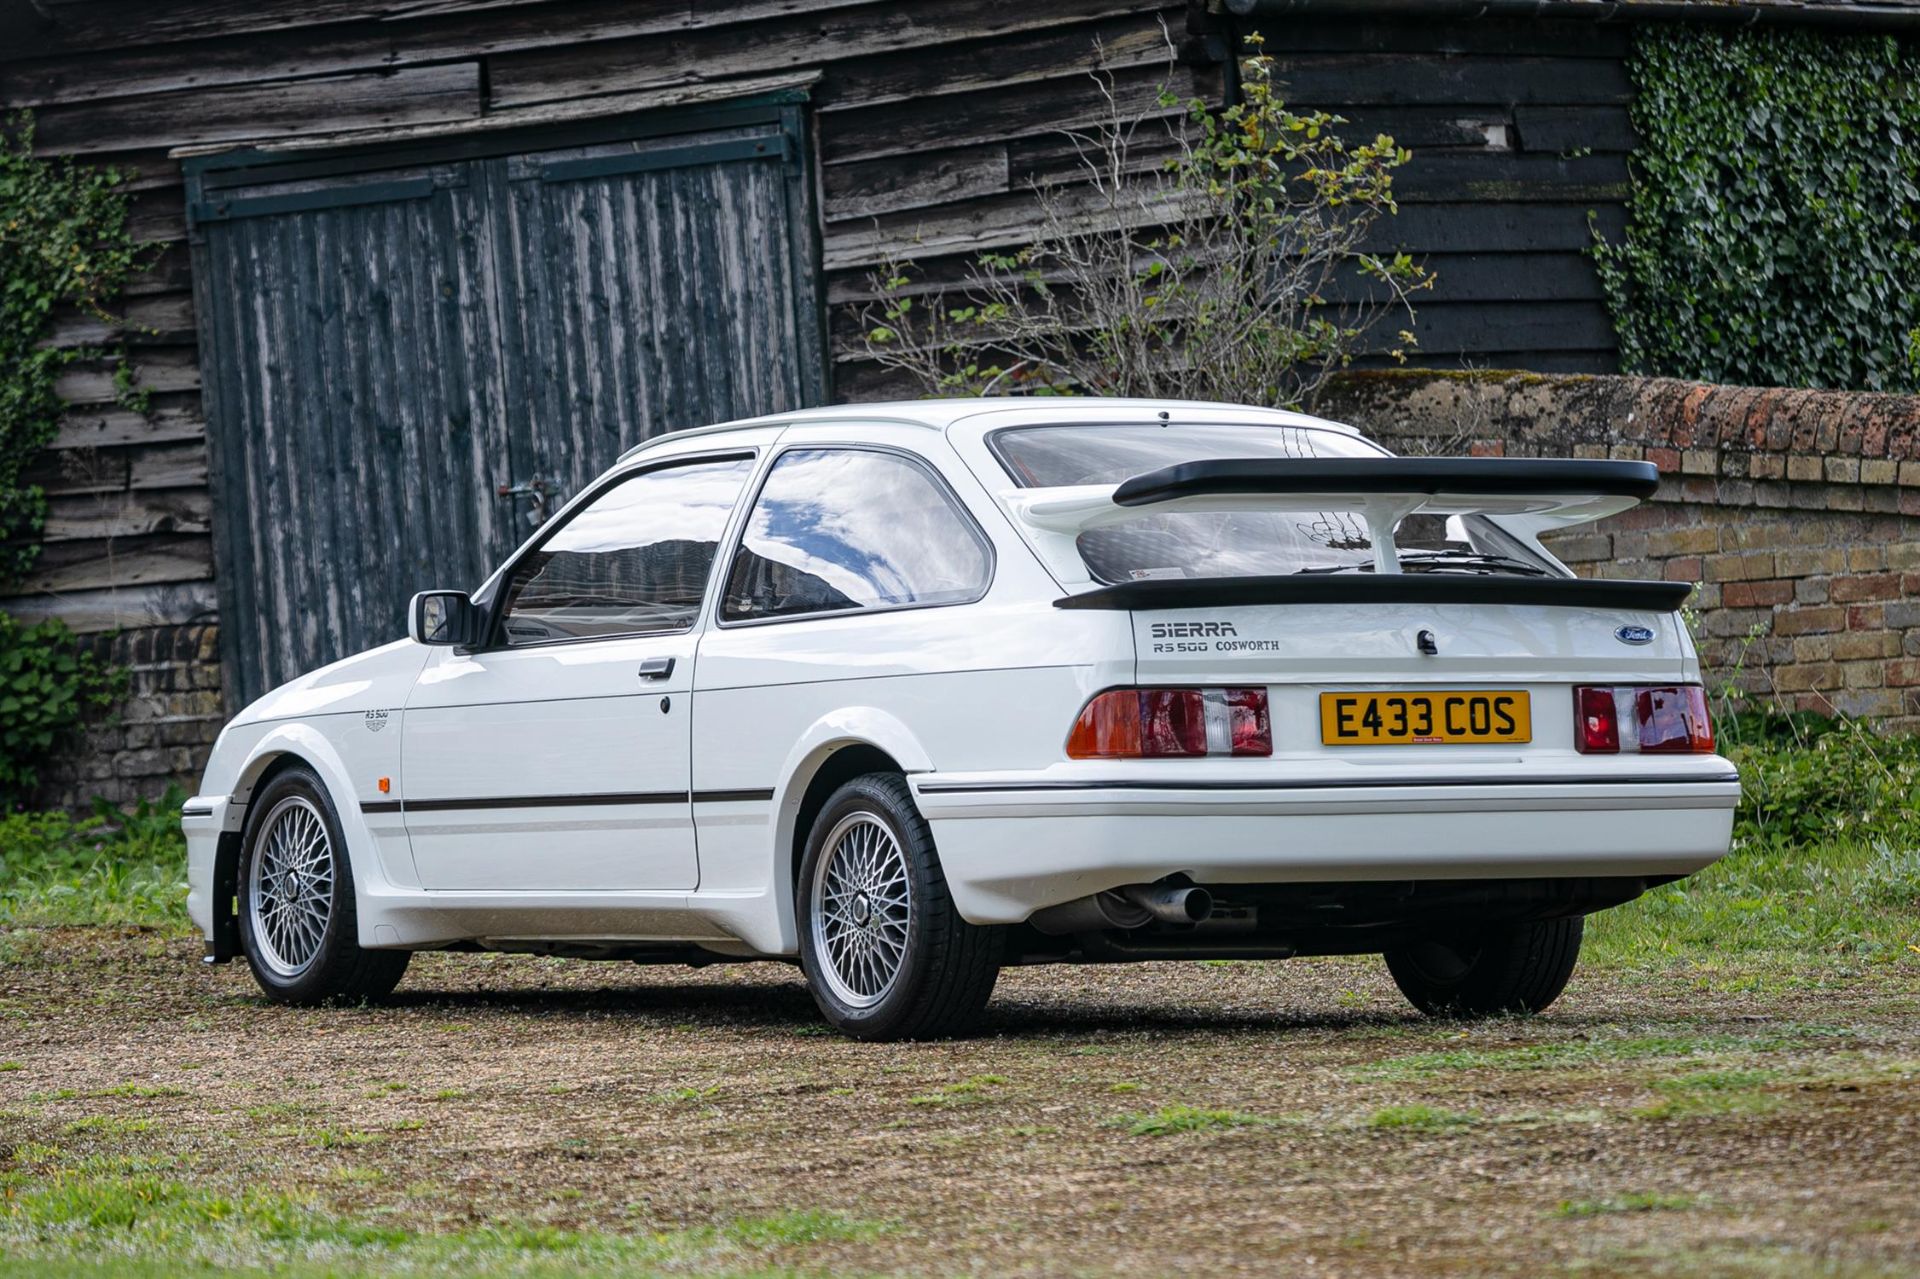 1987 Ford Sierra RS500 Cosworth #433 - 12,805 Miles - Image 4 of 10